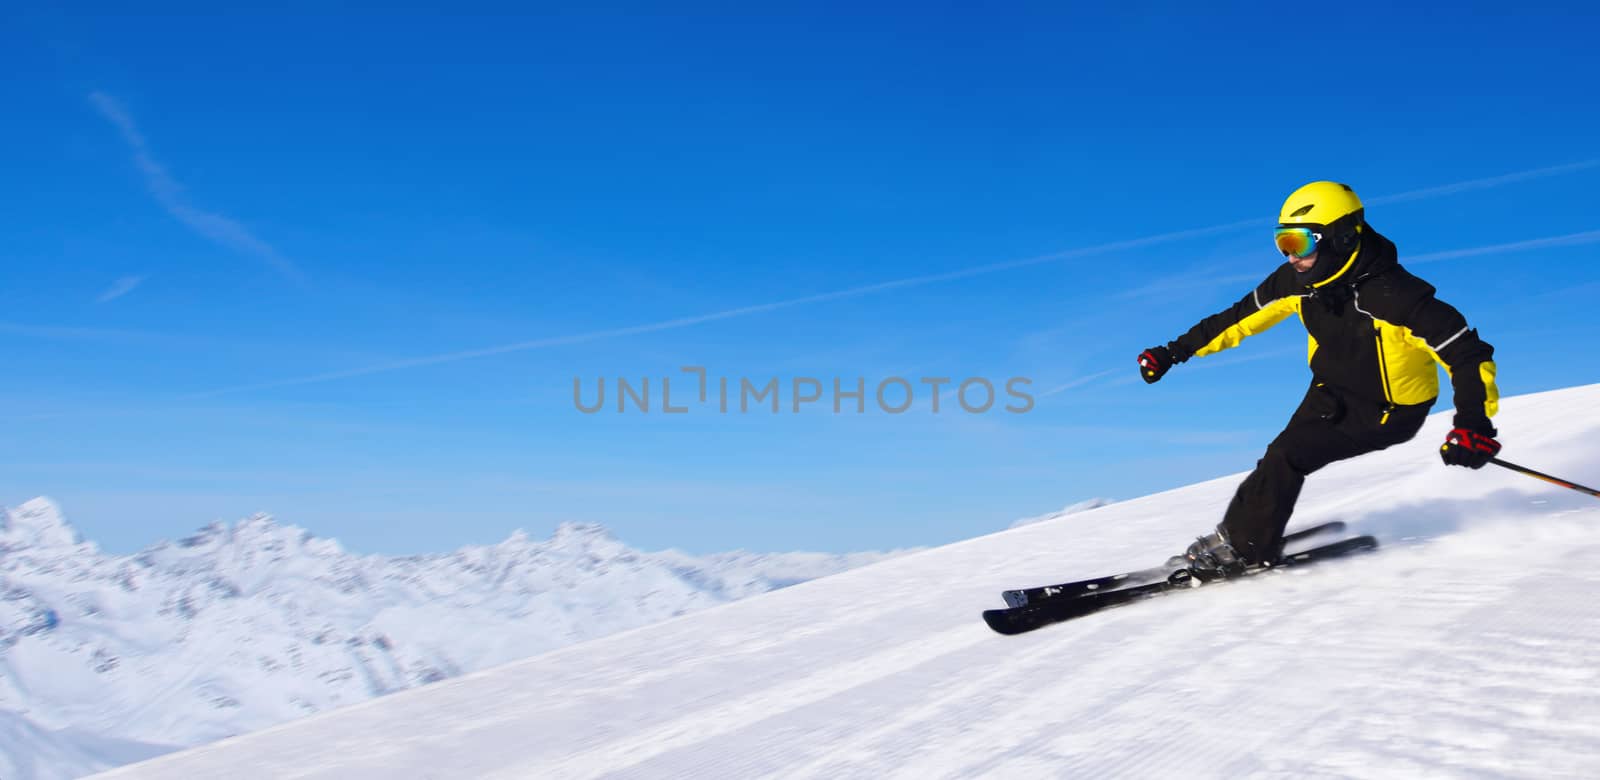 Professional alpine skier skiing downhill in high mountains of Alps banner background with copy space for text